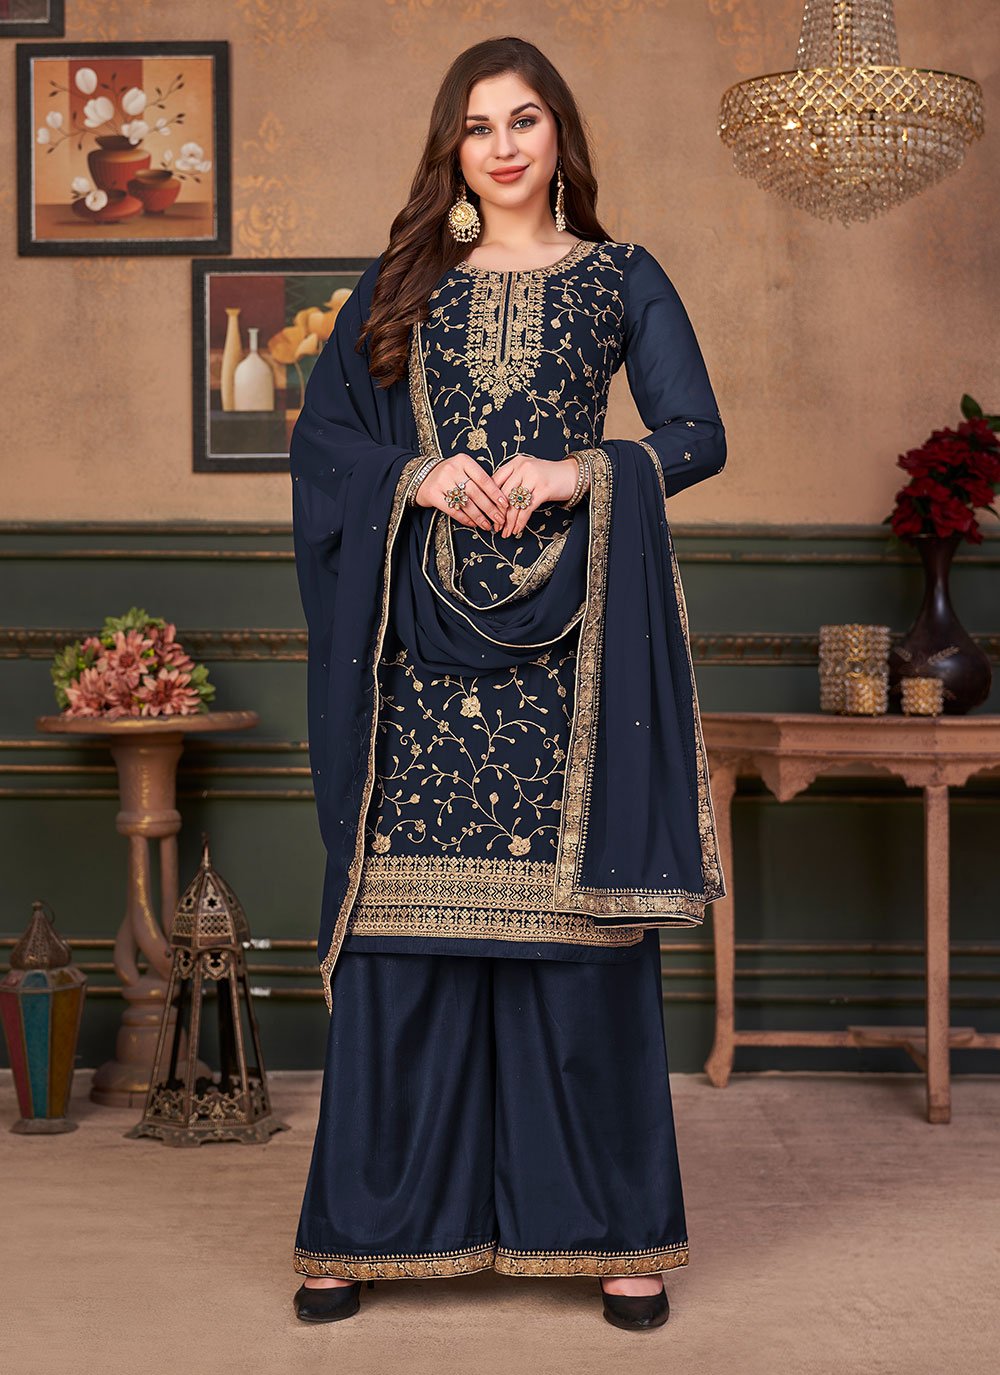 Faux Georgette Designer Pakistani Salwar Suit in Blue Enhanced with Embroidered